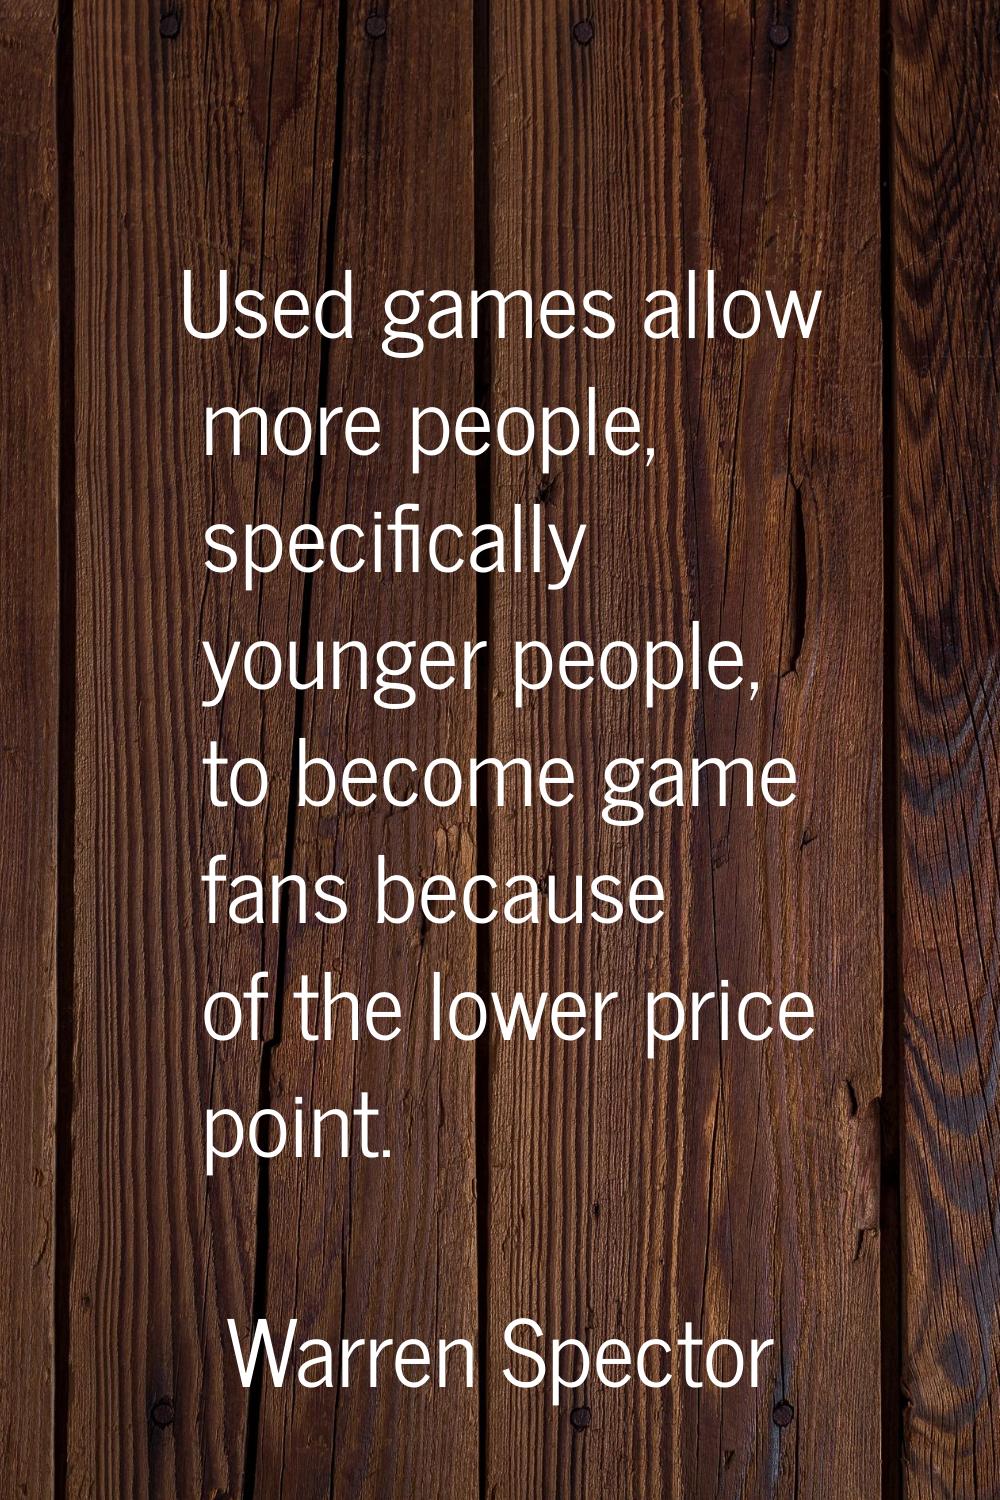 Used games allow more people, specifically younger people, to become game fans because of the lower